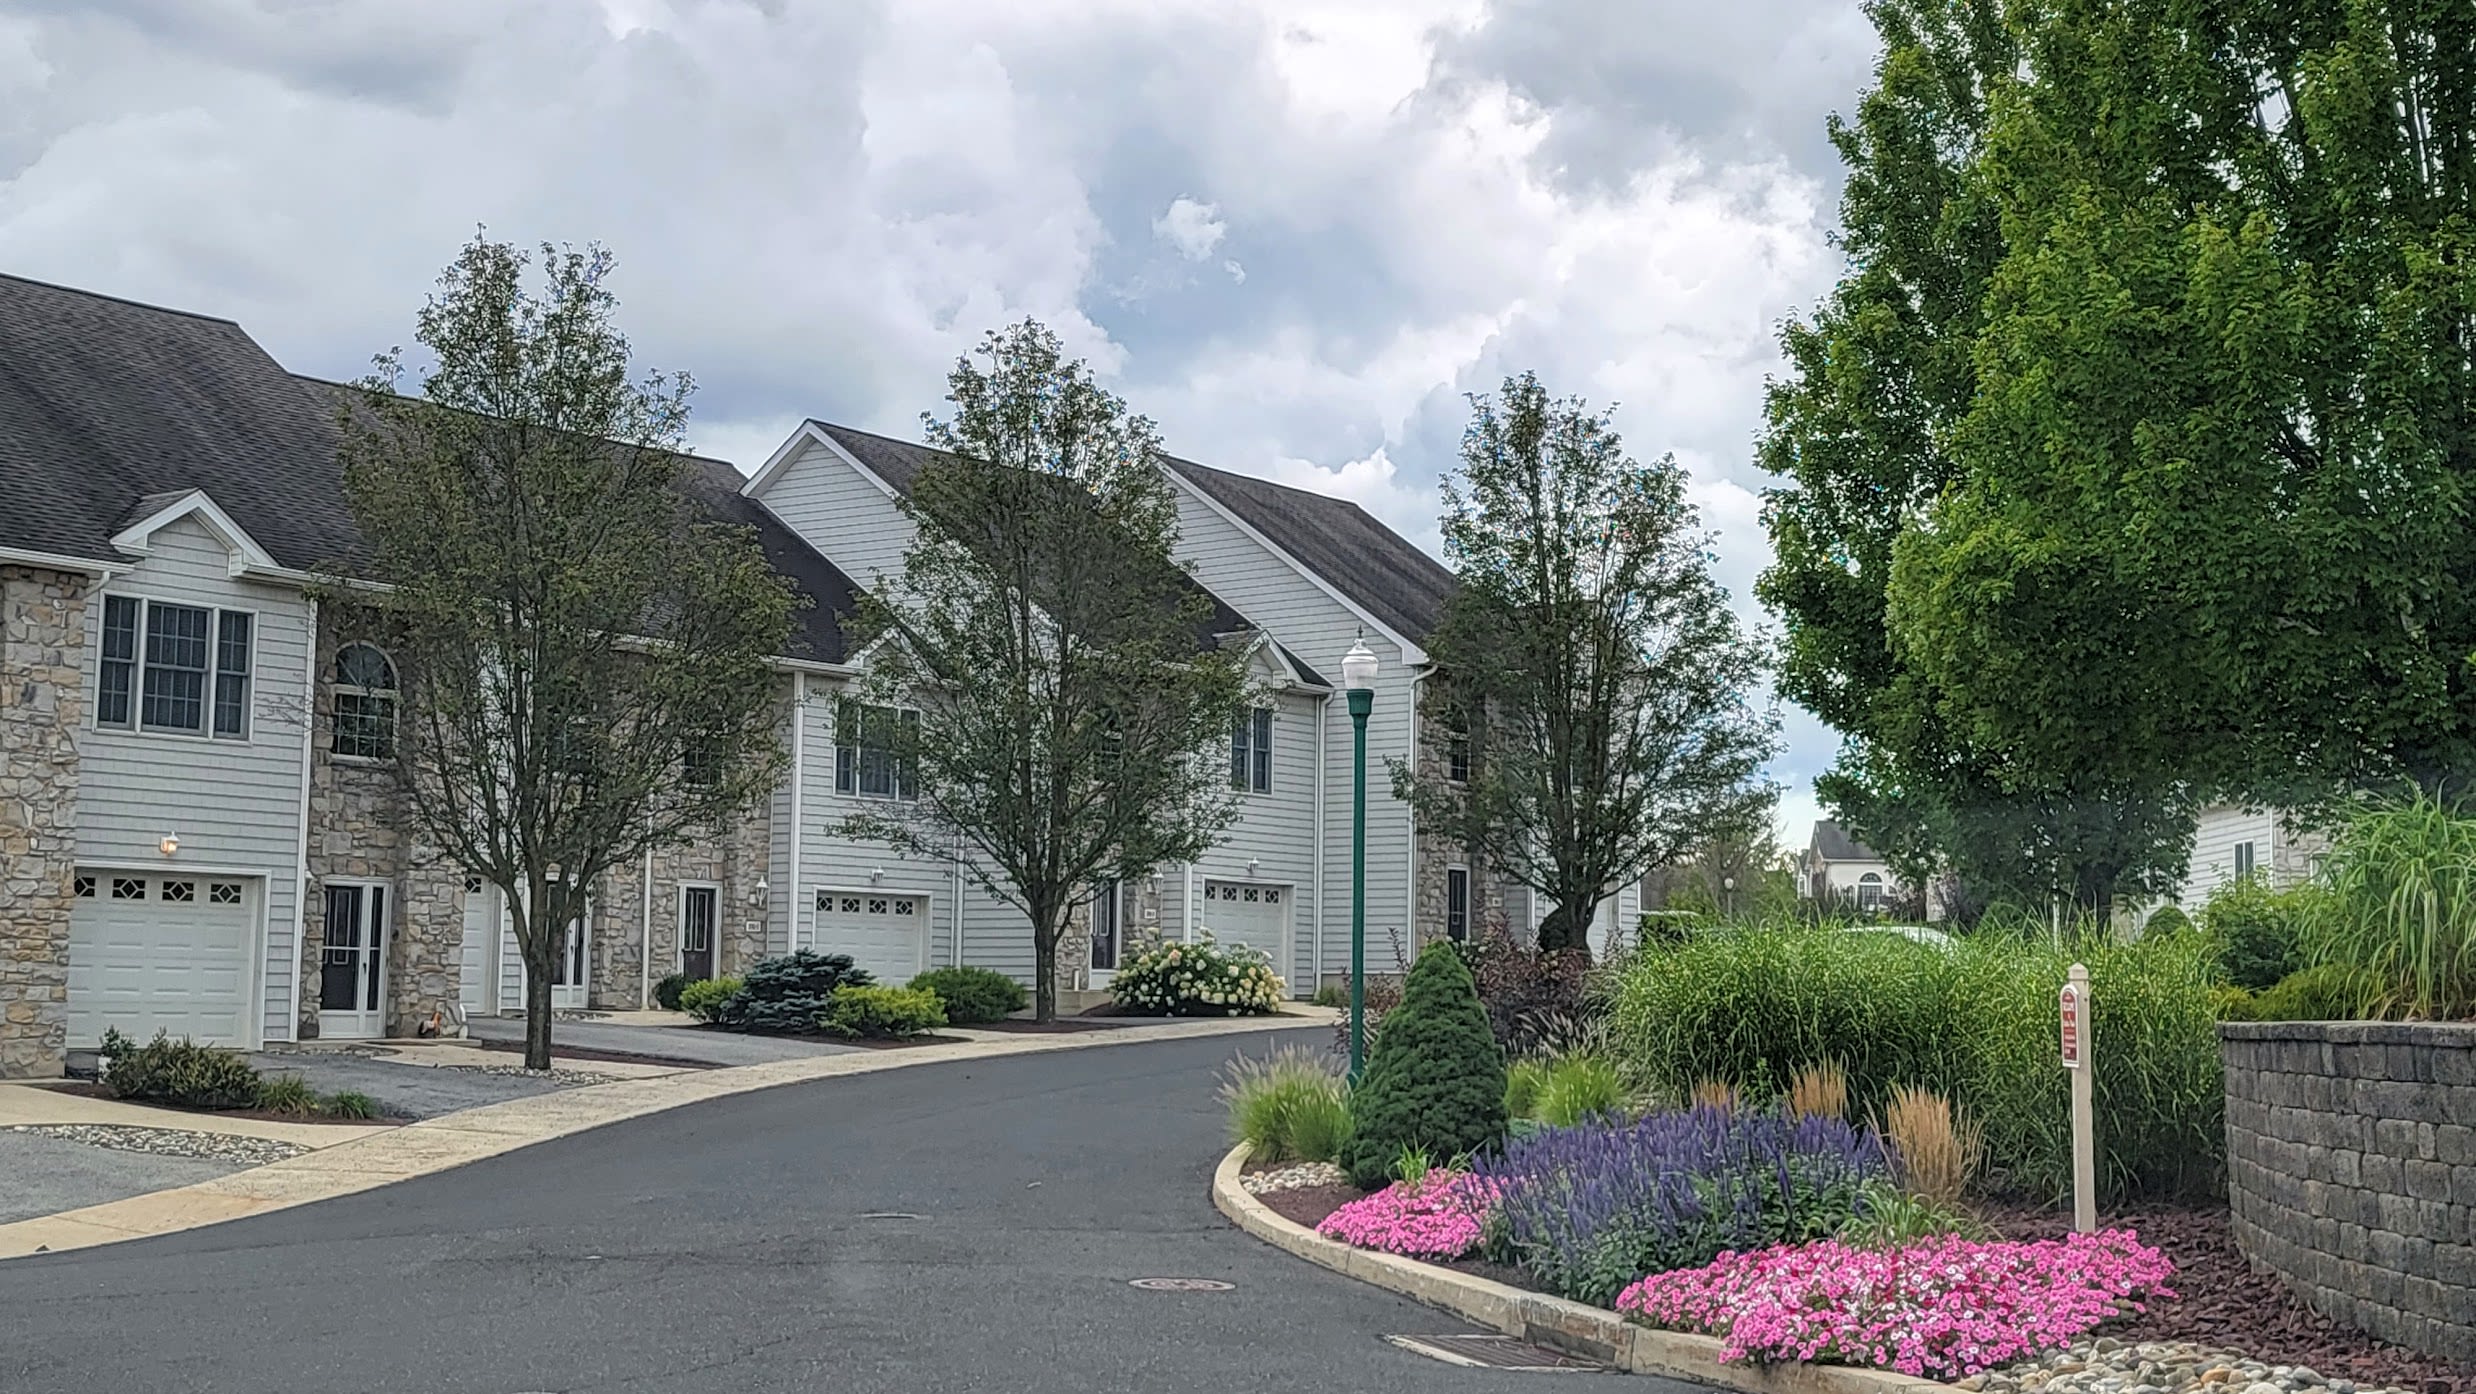 Townhomes in park-like setting at Springhouse Townhomes, Allentown, Pennsylvania